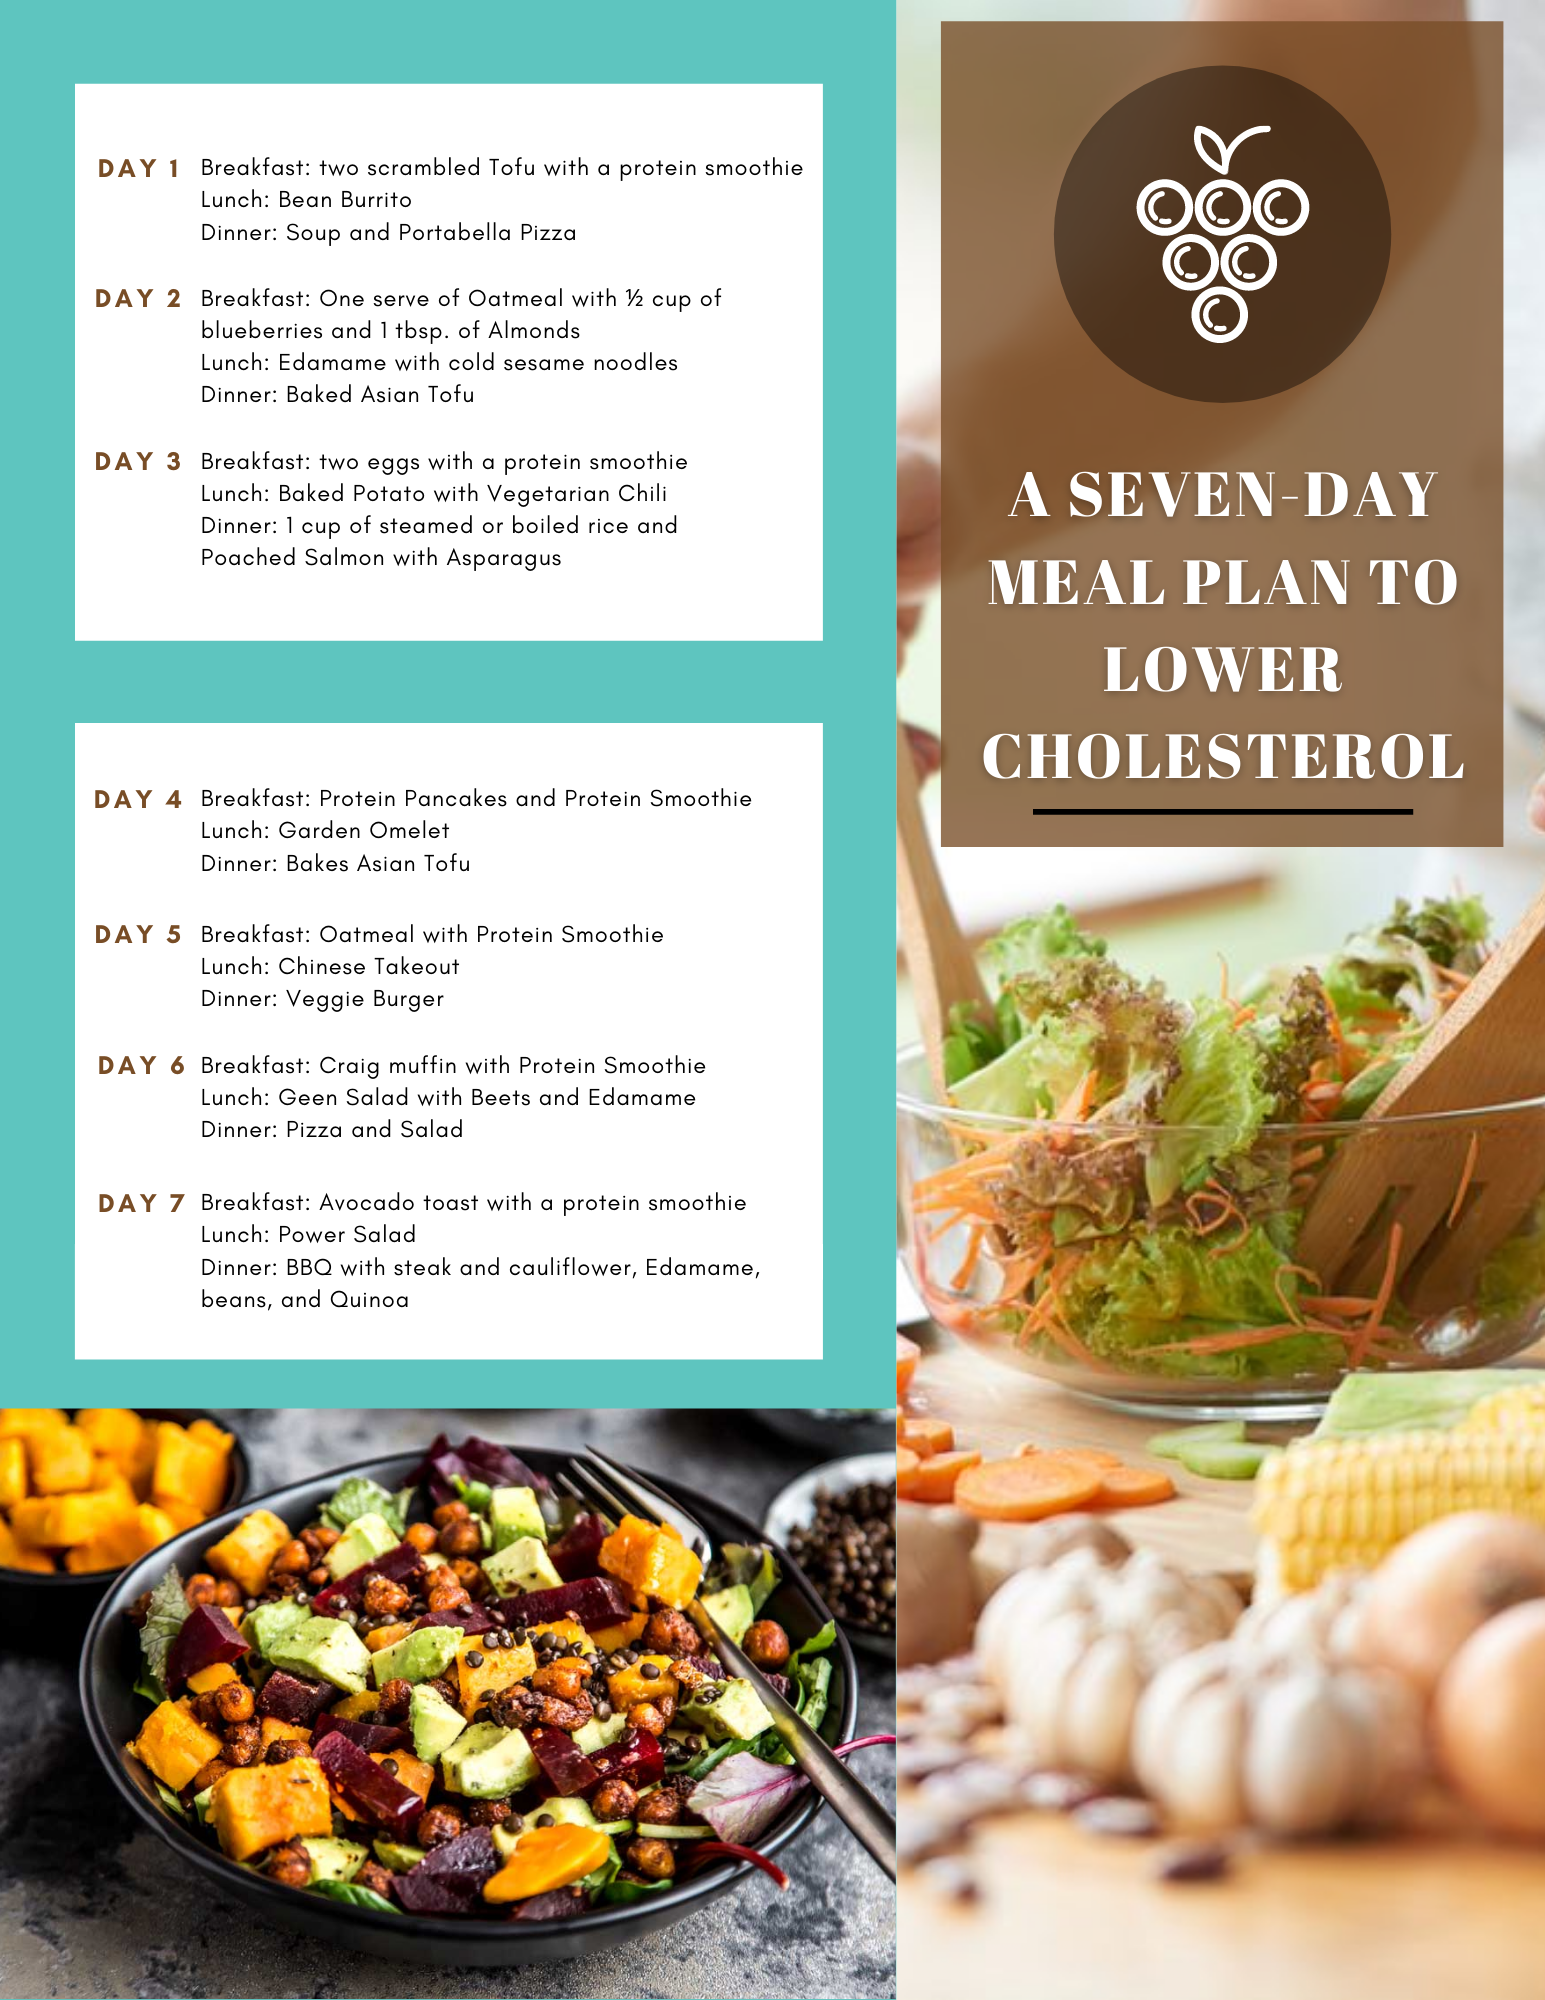 A seven-day meal plan to lower cholesterol